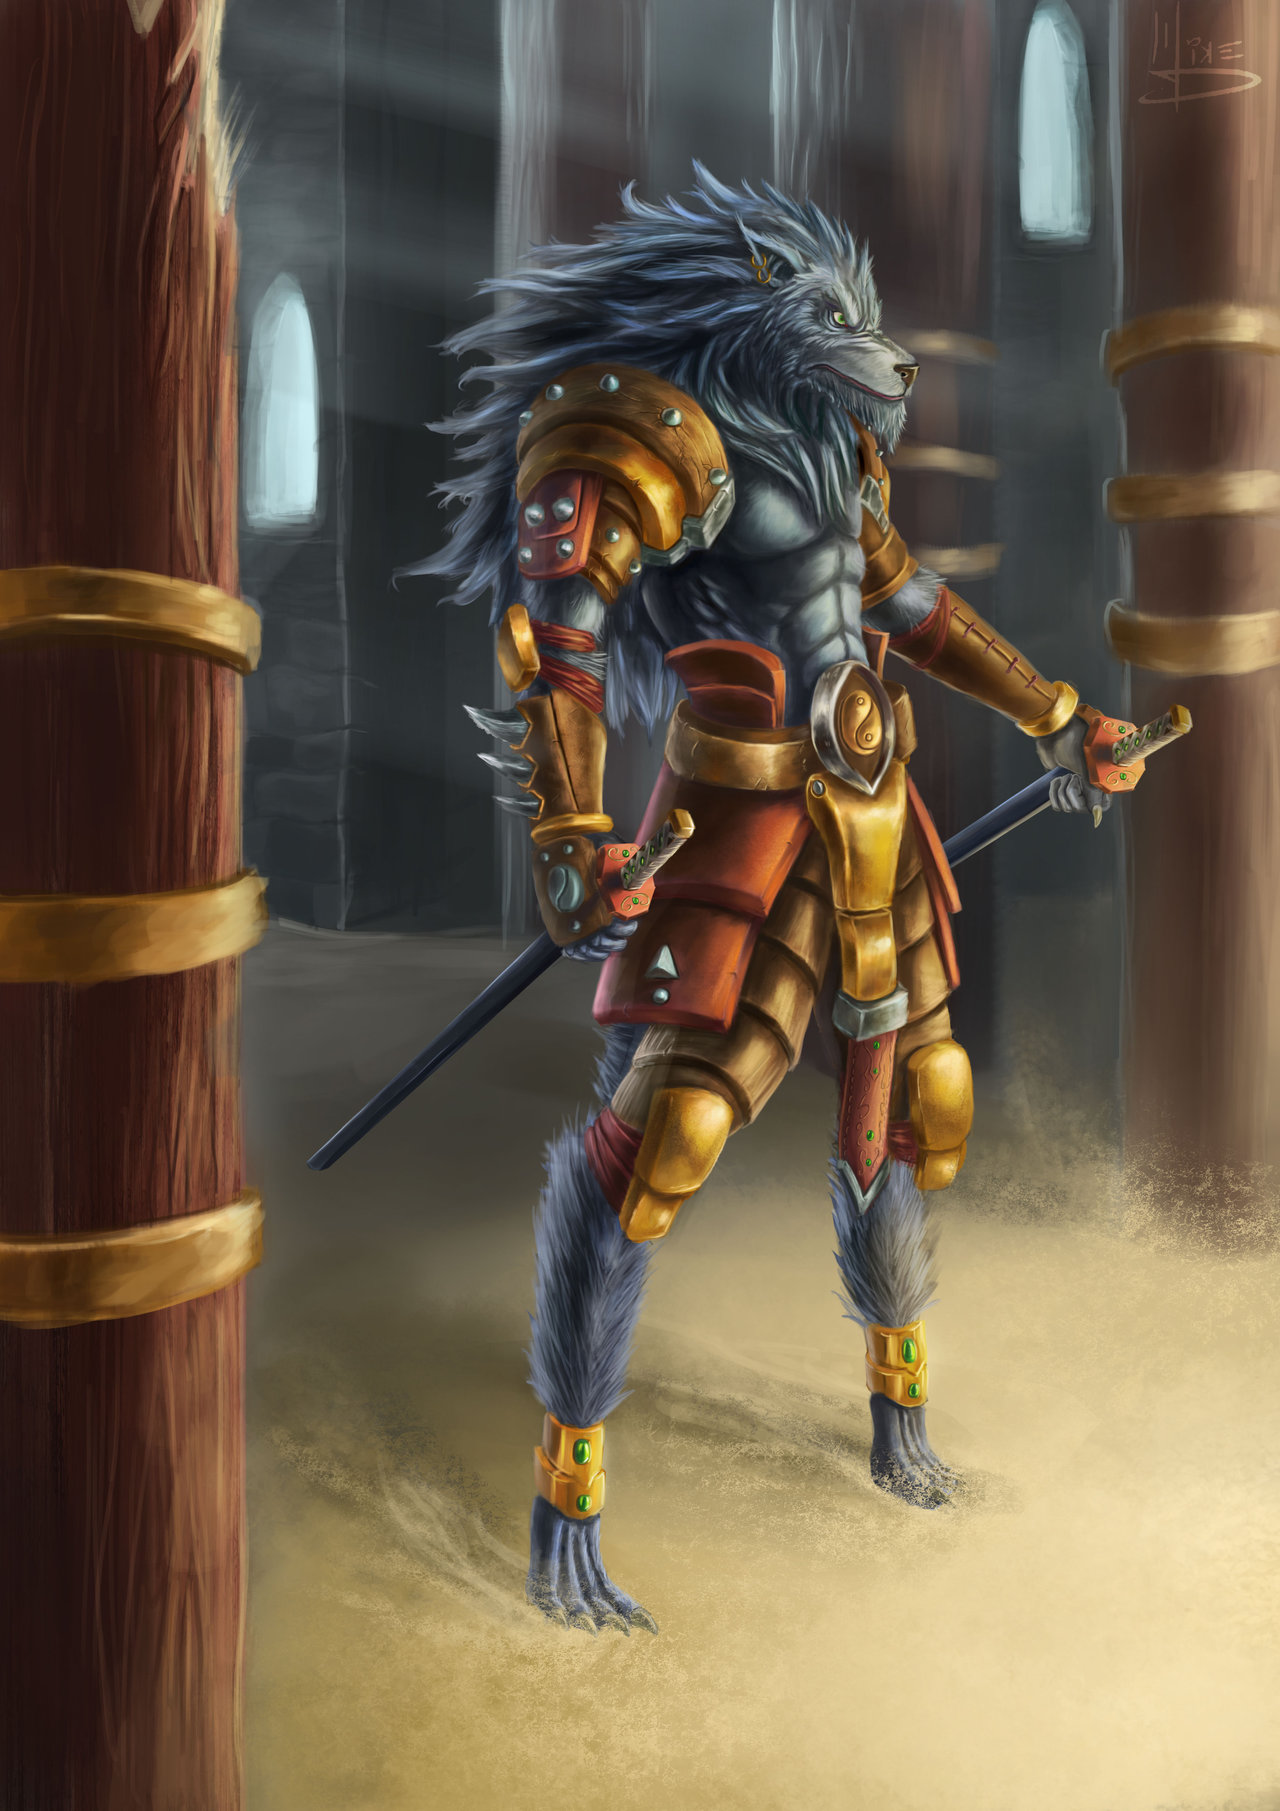 Temple Guardian by Mike-Tortuga on DeviantArt